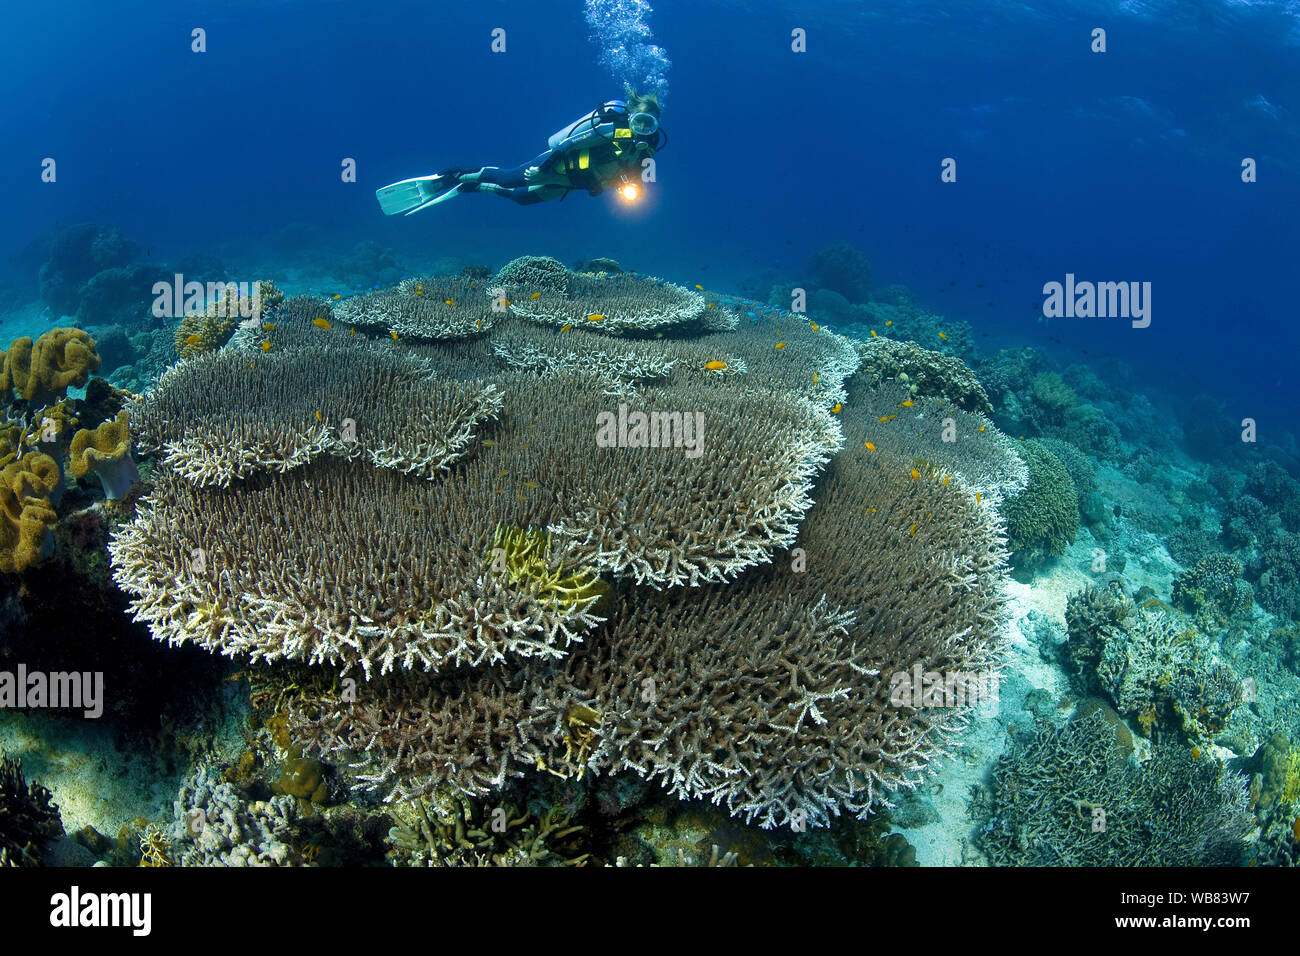 Scuba diver in a coral reef with dominating Acropora table corals (Acropora hyacinthus), Apo- reef, Dumaguete, Negros, Visayas, Philippines Stock Photo